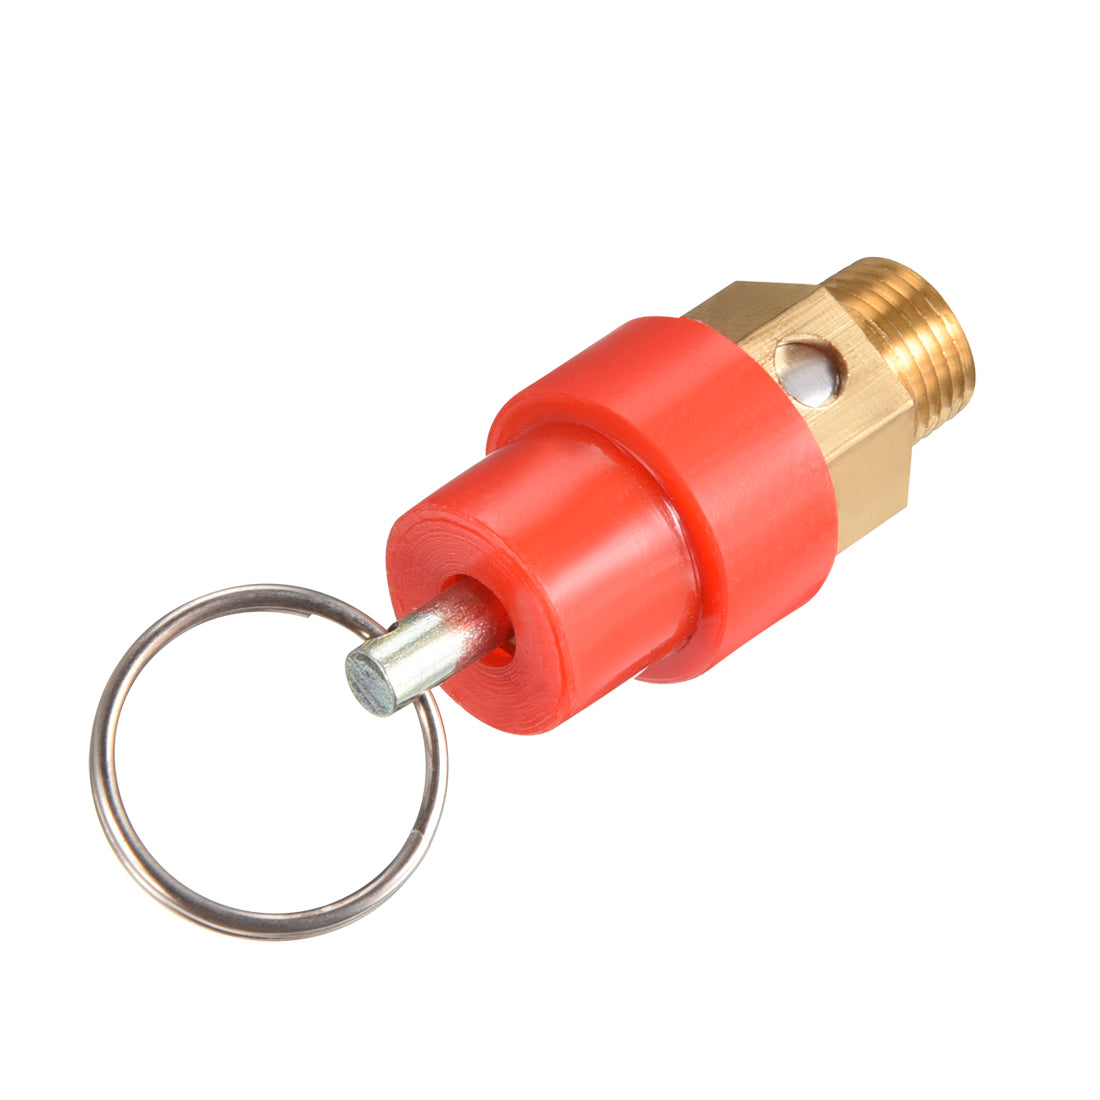 uxcell Uxcell 1/8" Thread Pressure Relief Valve for Air Compressor Red Gold Tone w Split Ring